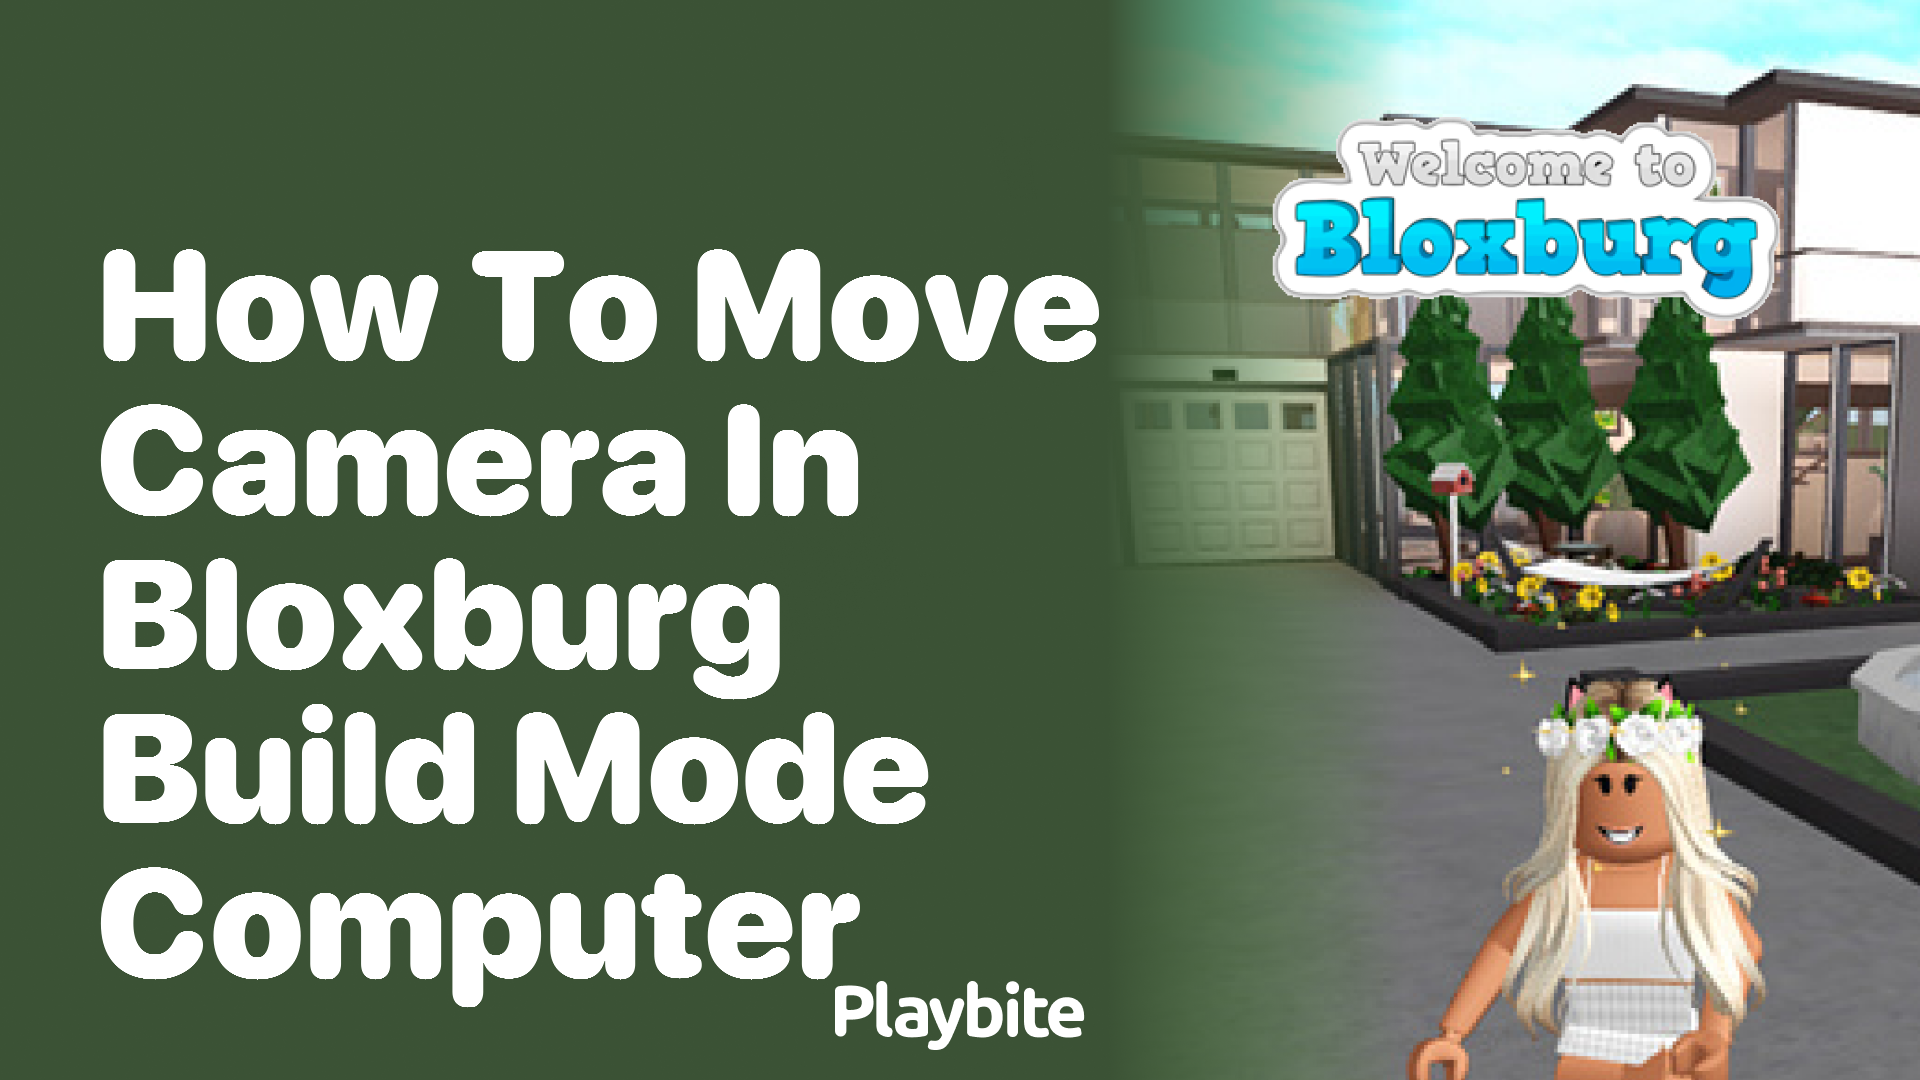 How to Move the Camera in Bloxburg Build Mode on a Computer